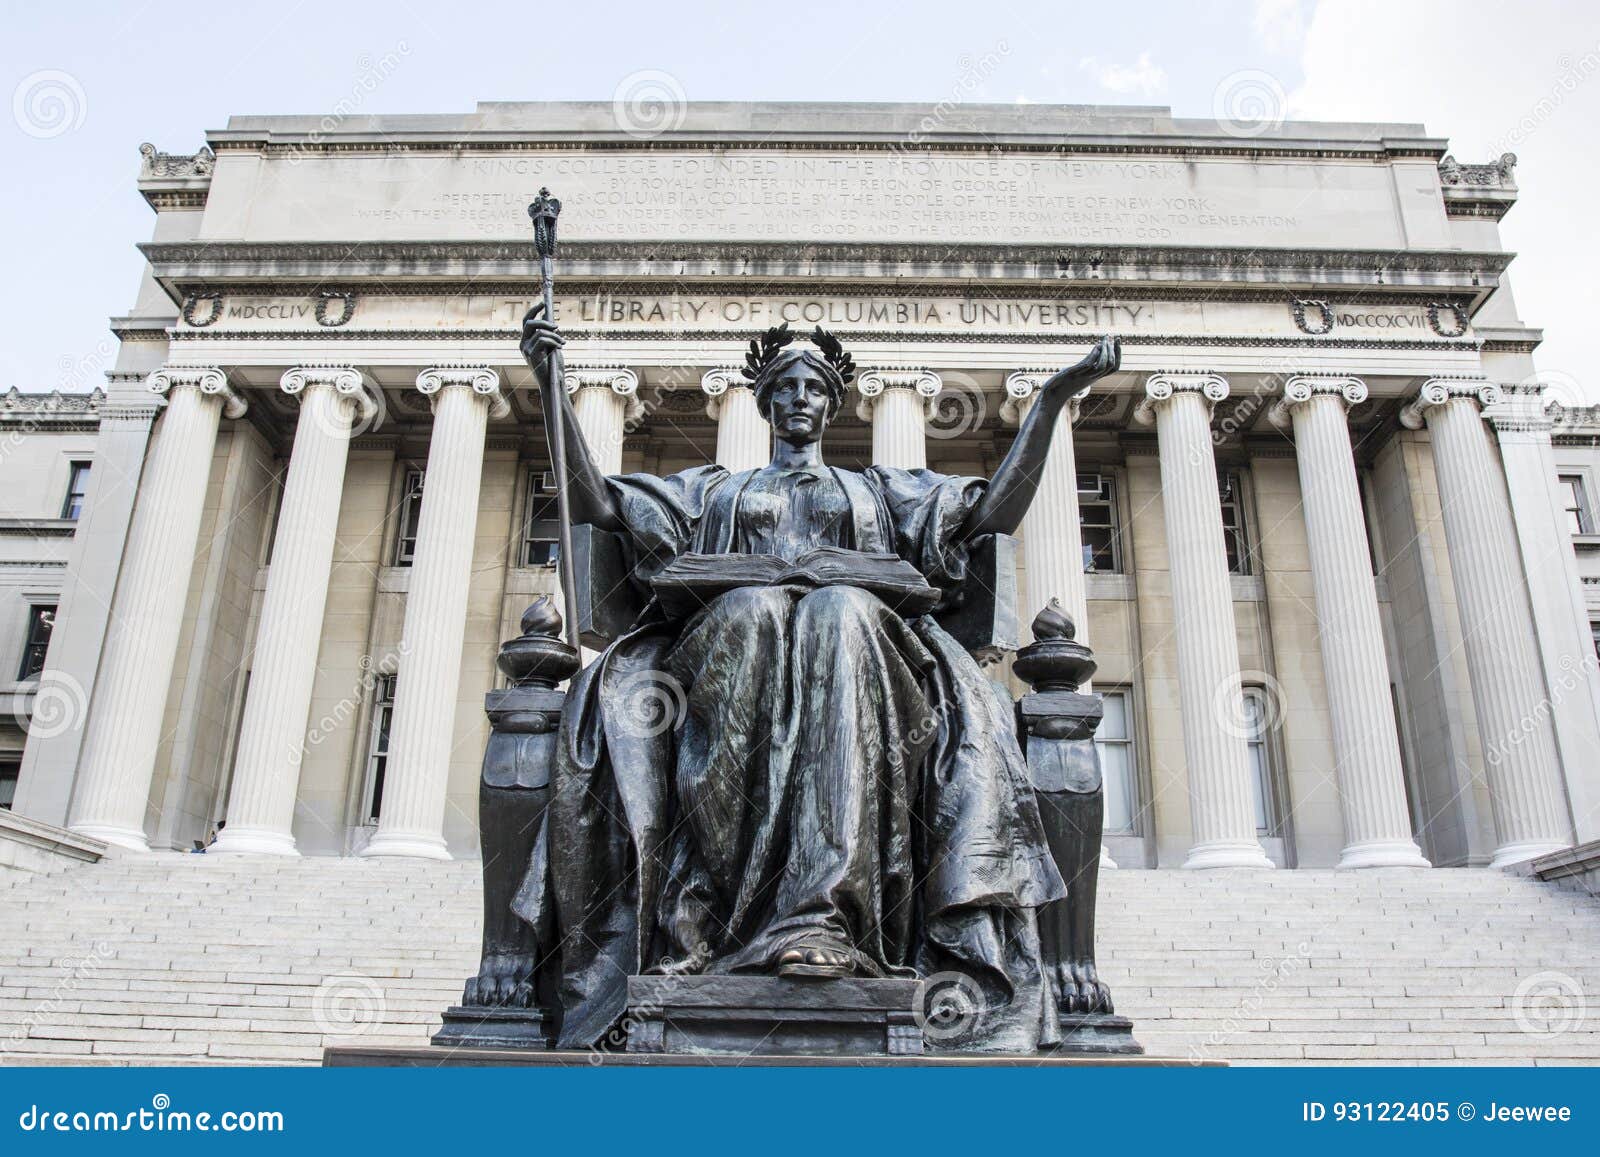 Vergil Columbia University Library Inscription Detail Stock Photo -  Download Image Now - iStock